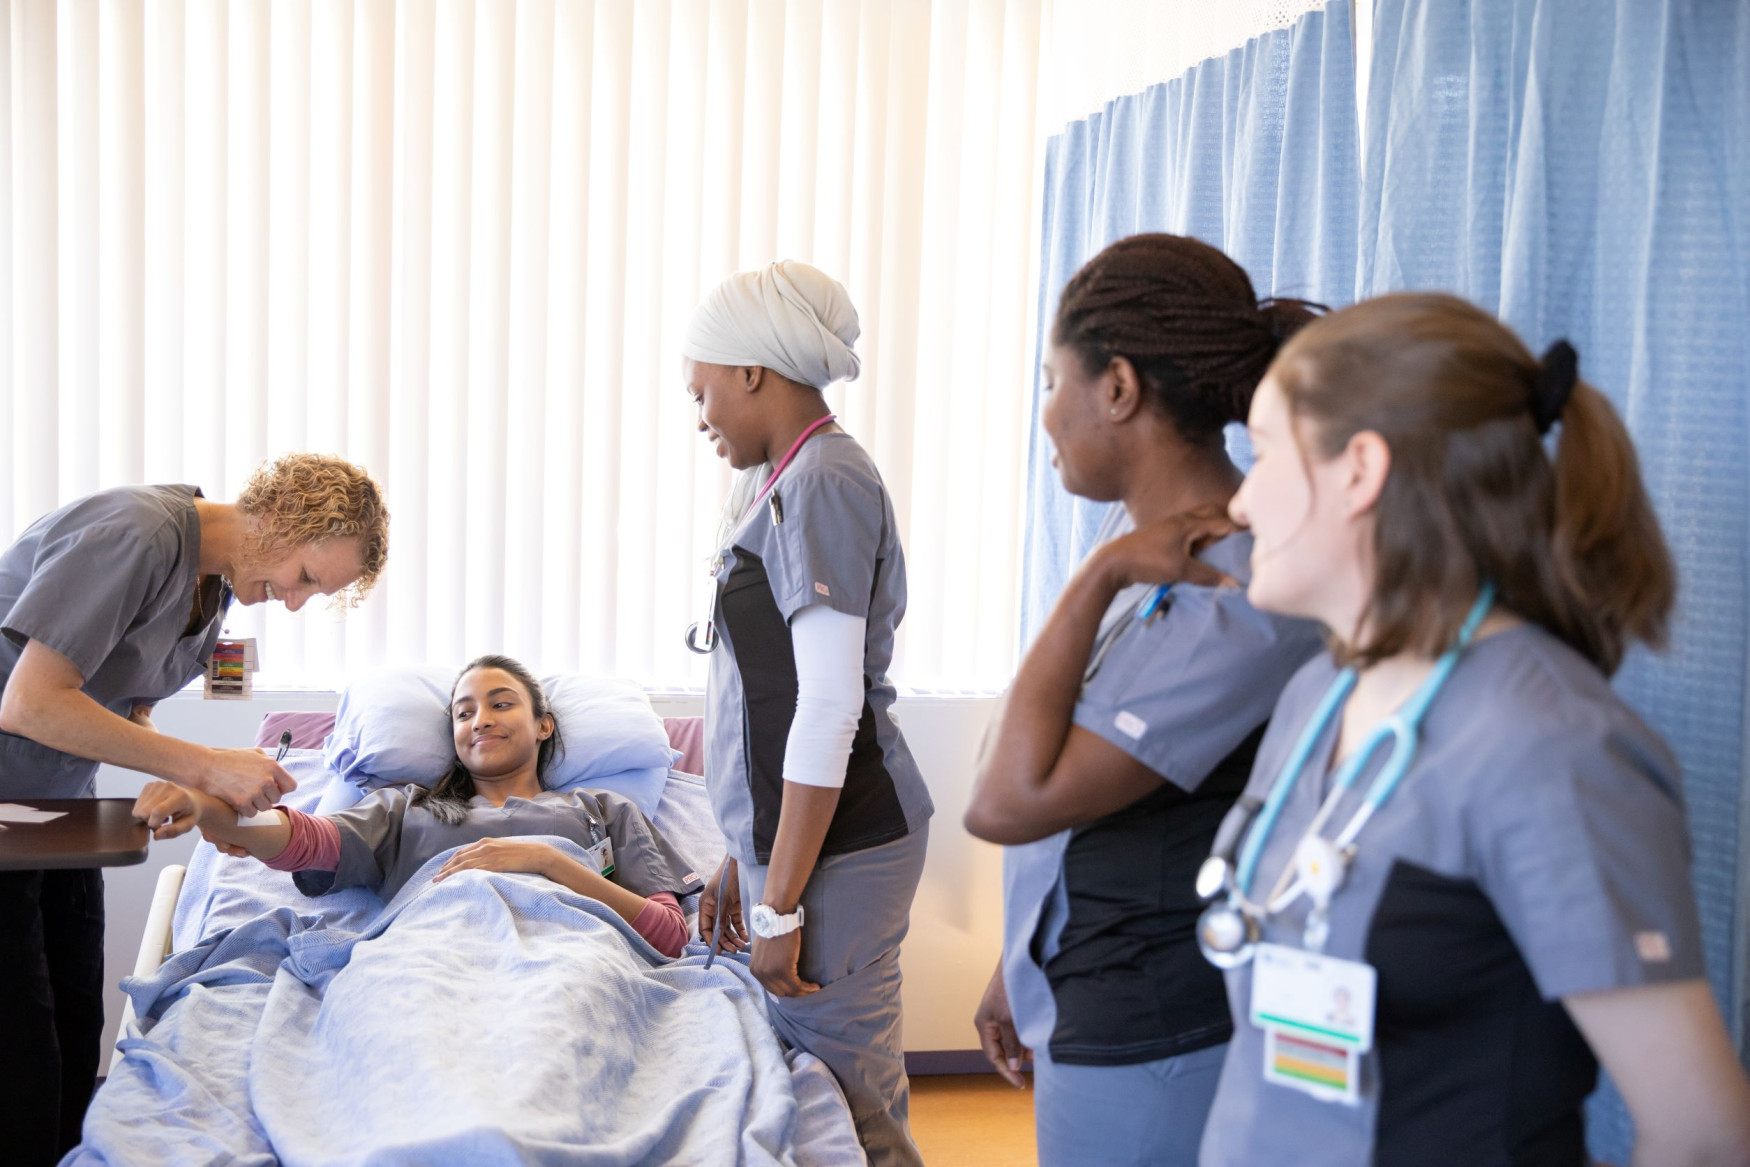 A group of nursing students gathers around a patient.